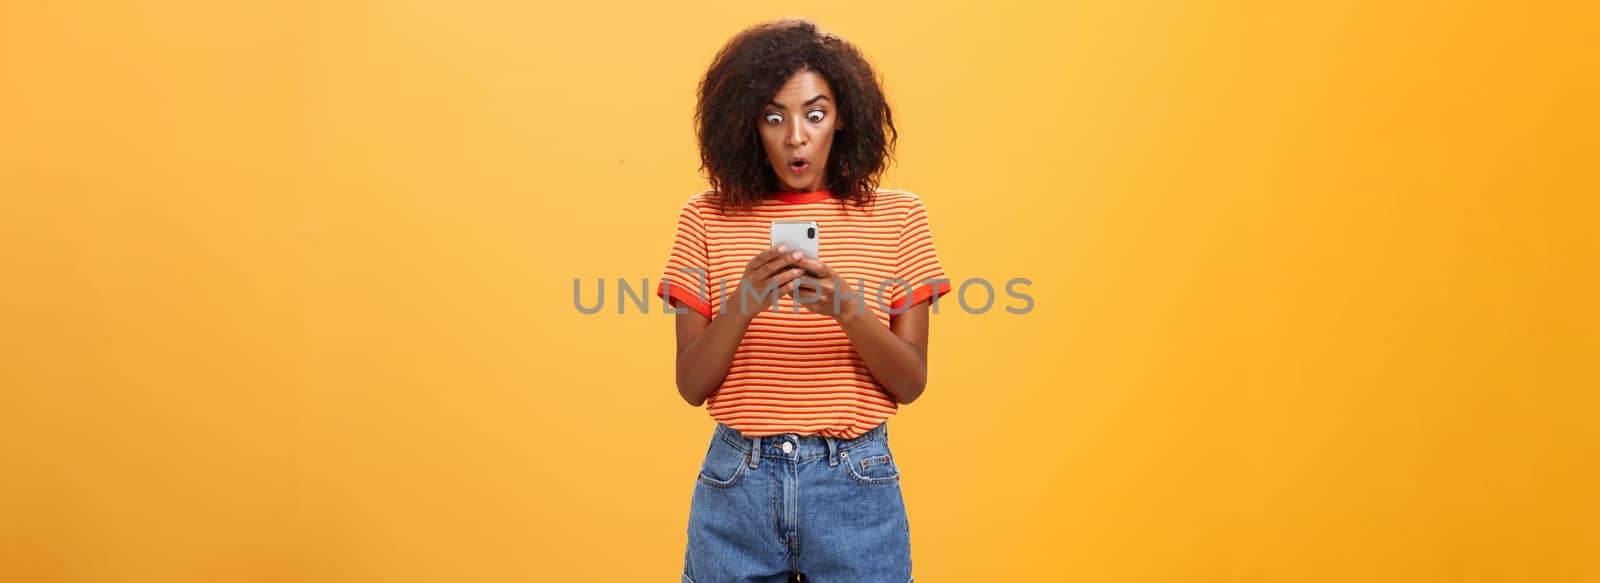 Indoor shot of shocked stunned african american young woman with afro hairstyle staring surprised and excited at smartphone screen holding cellphone reading amazing message over orange wall. Lifestyle.